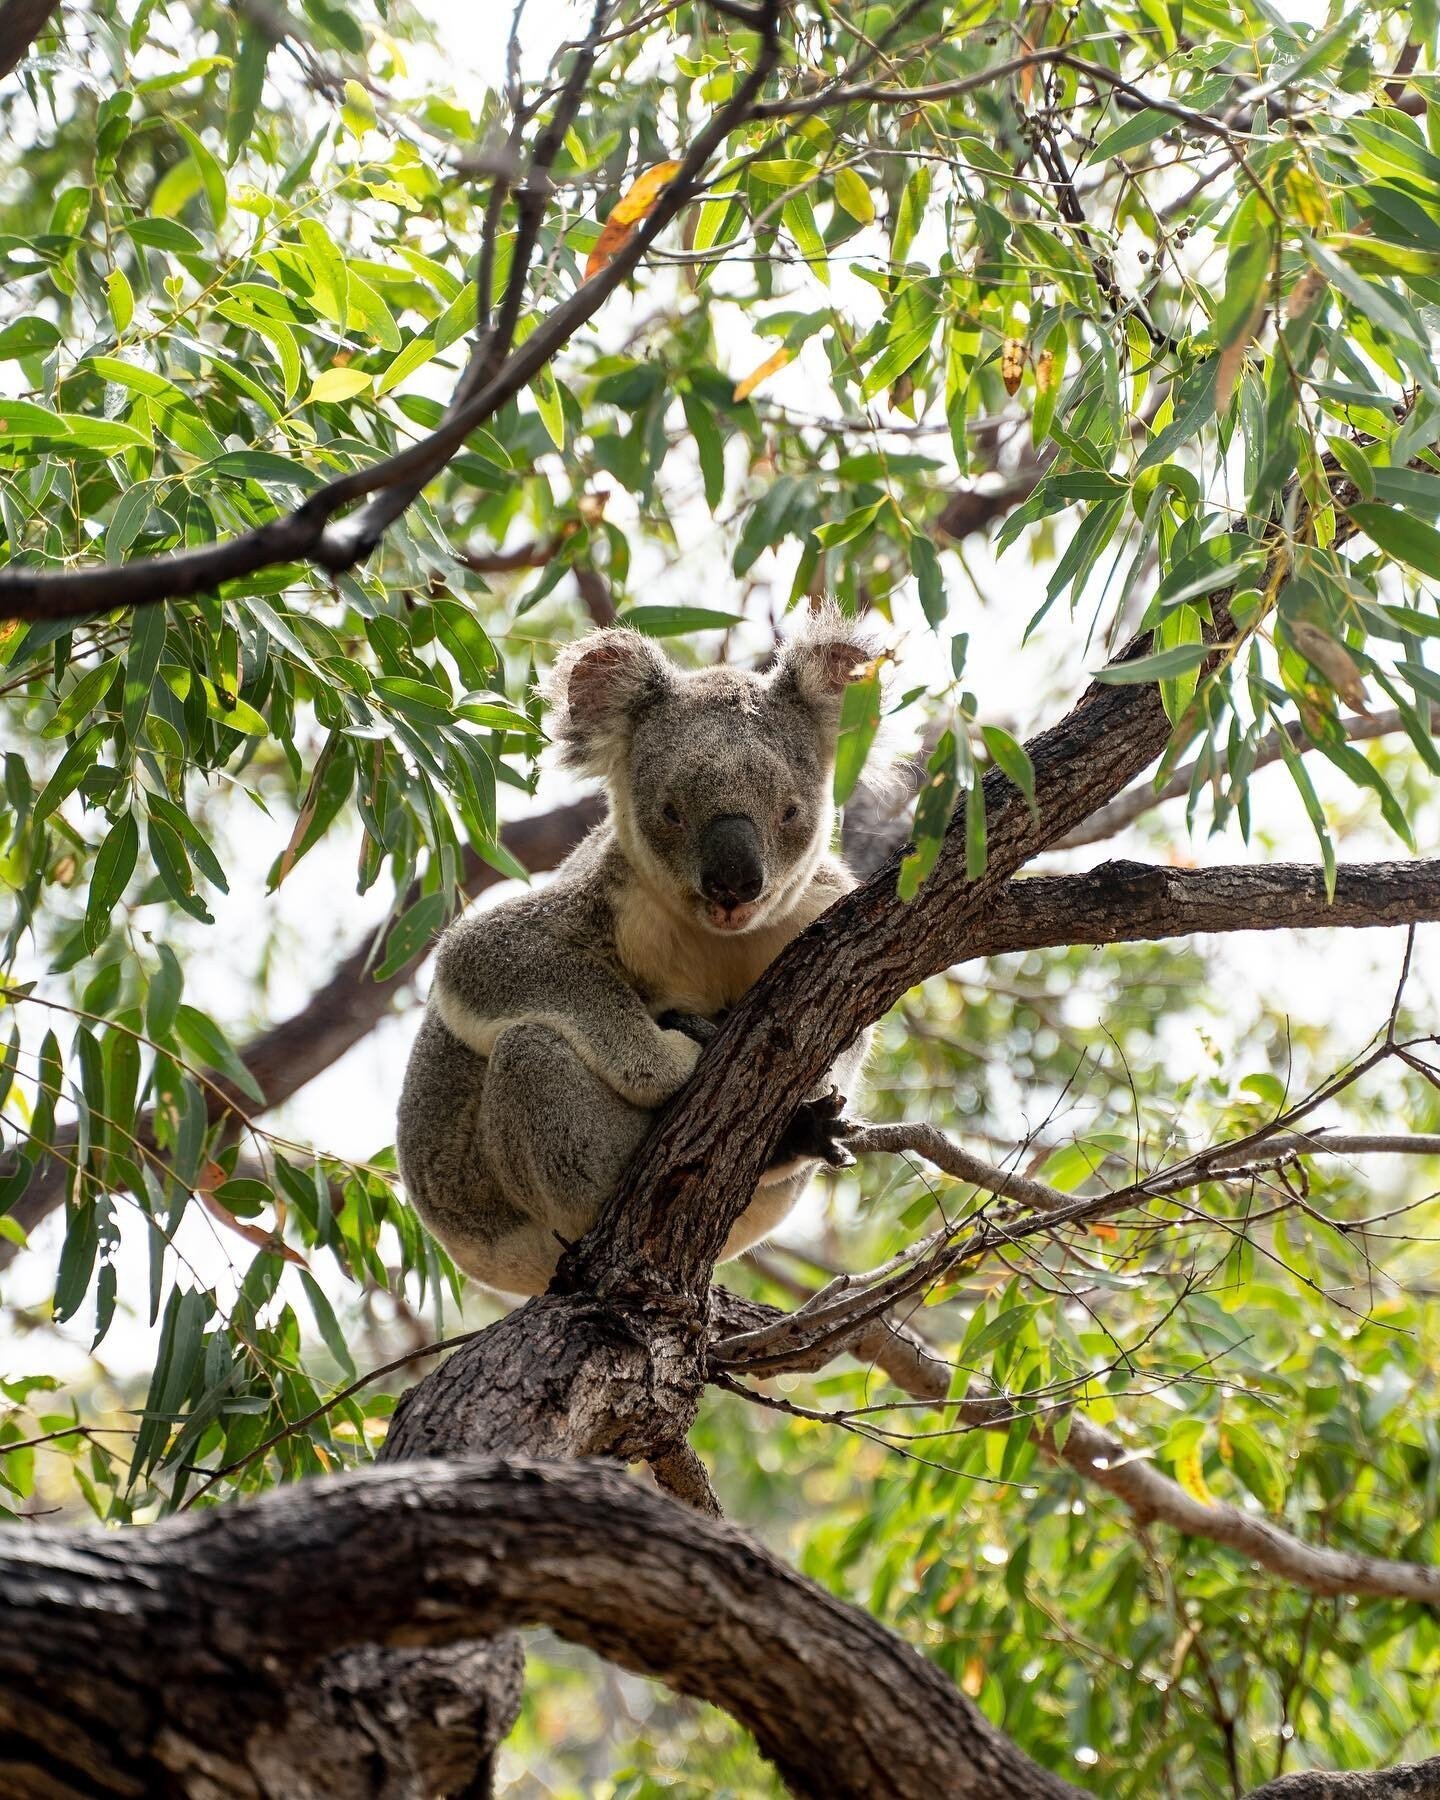 Enjoy the walk up our renowned Forts Walk and enjoy meeting the residents that call Maggie's National Parks home 🐨🍃⁠
⁠
We promise it's a walk you won't forget!⁠
⁠
Photo via @francescocamilloph⁠
⁠
#thisismagneticisland #upforunexpected #magneticisla